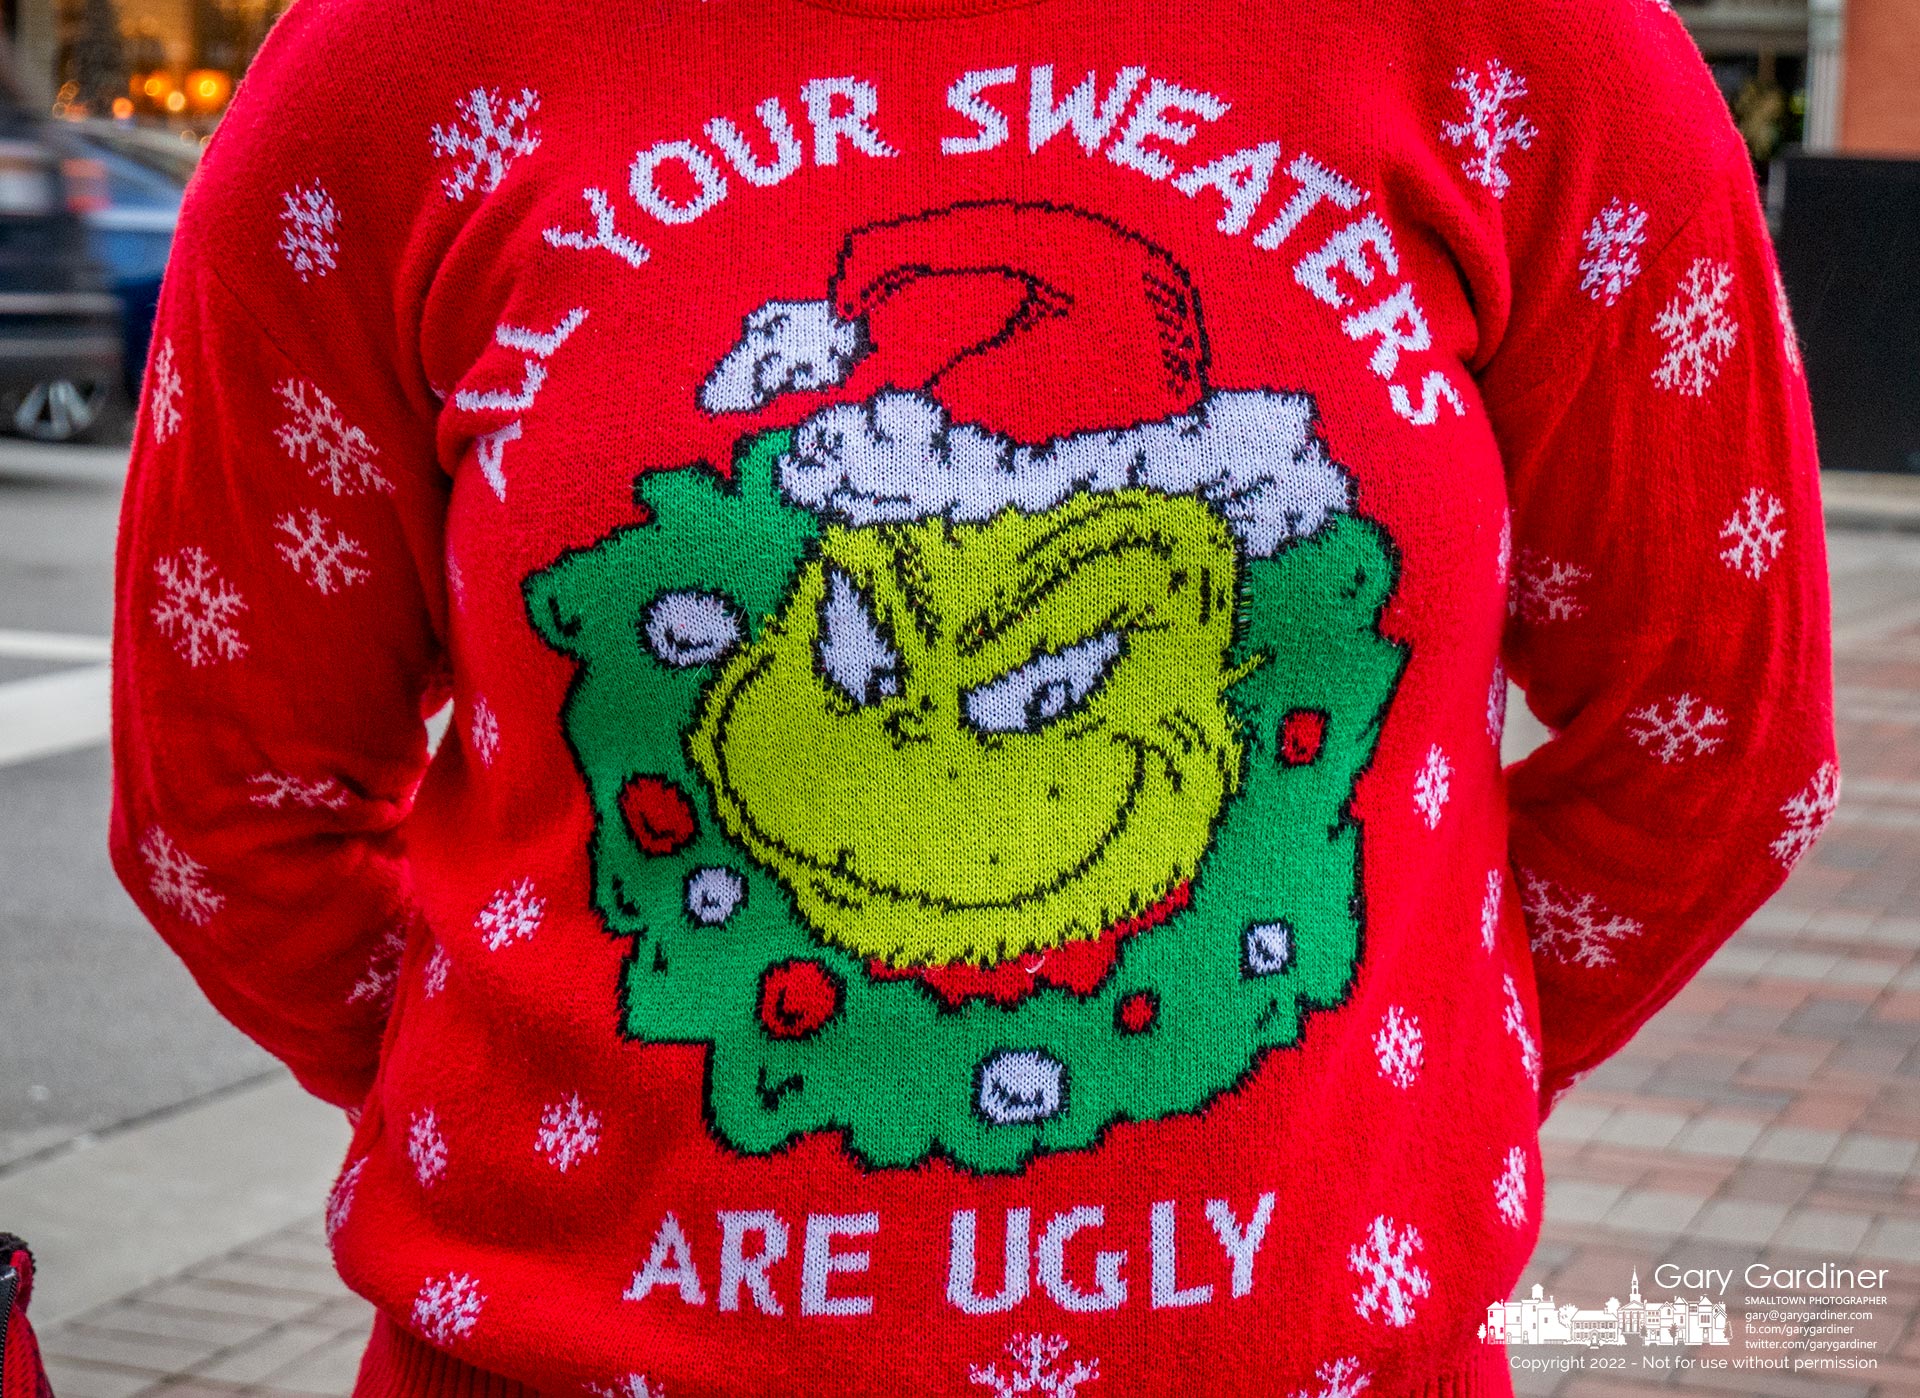 It was Ugly Christmas Sweater Sunday in Uptown Westerville and although there wasn't a declared winner this Scroogish Grinch-centered sweater stood out from all that appeared. My Final Photo for December 11, 2022.